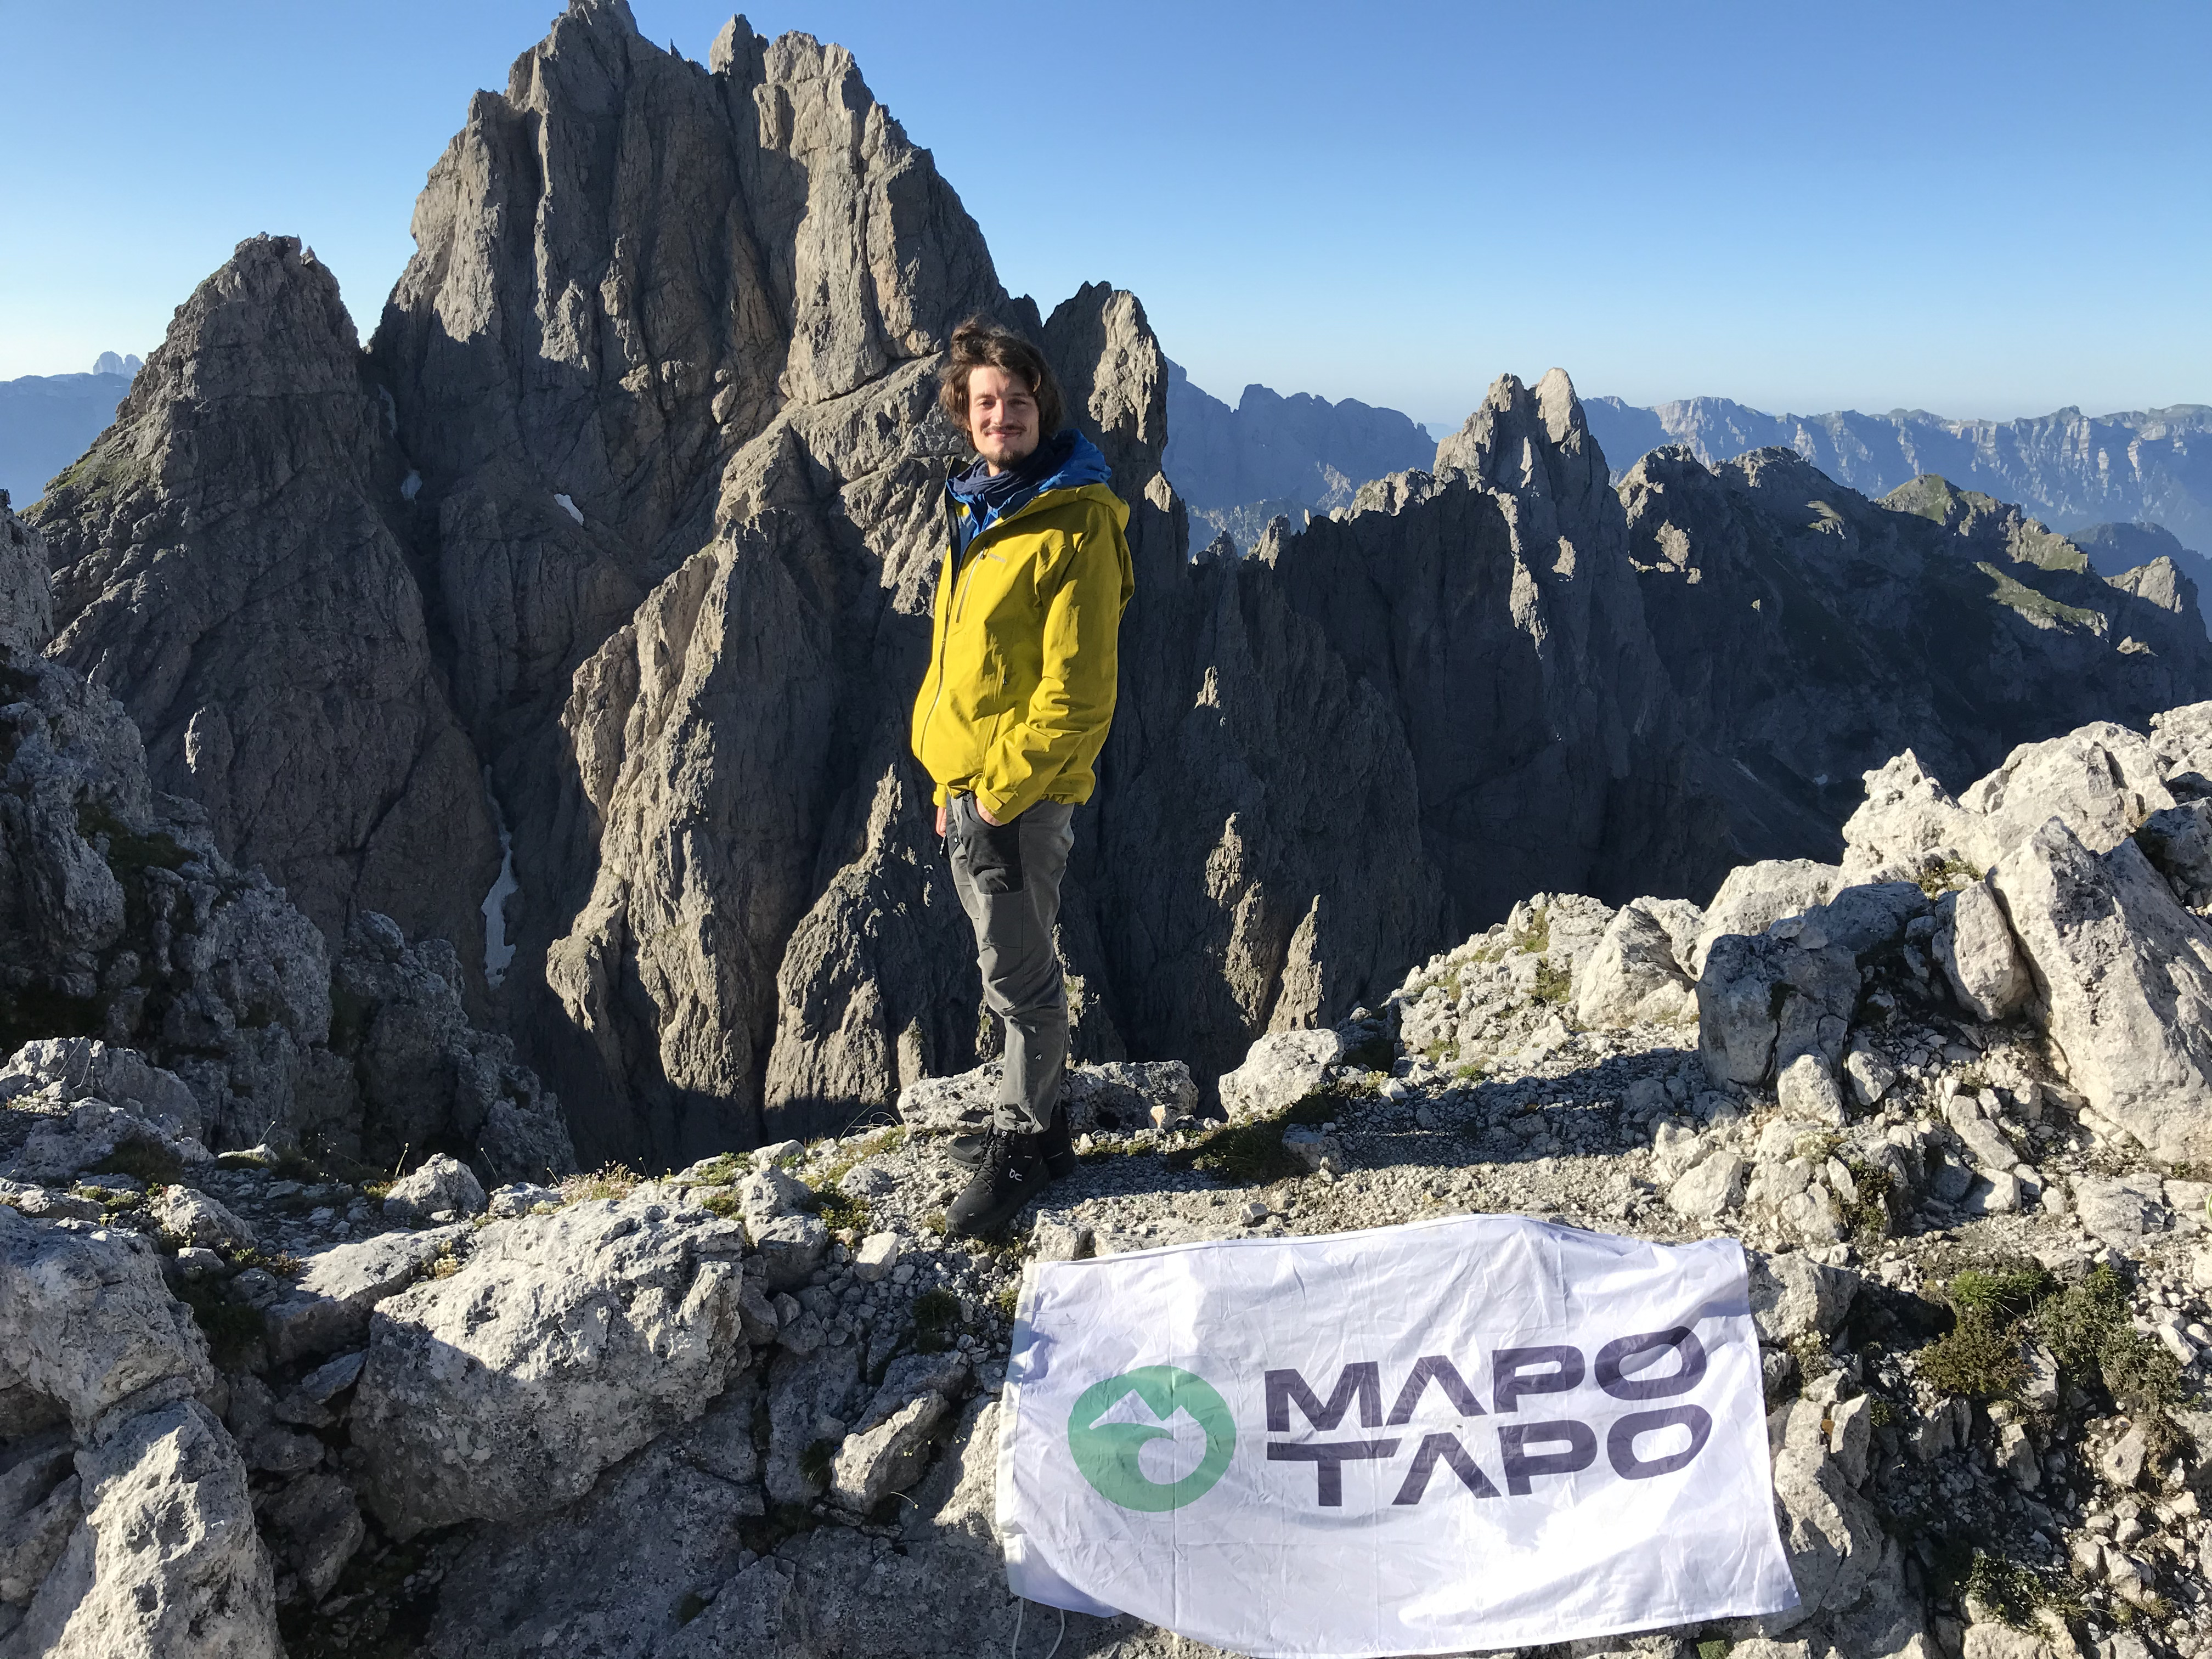 Mapo Tapo CEO standing in front of some peaks in the Dolomites